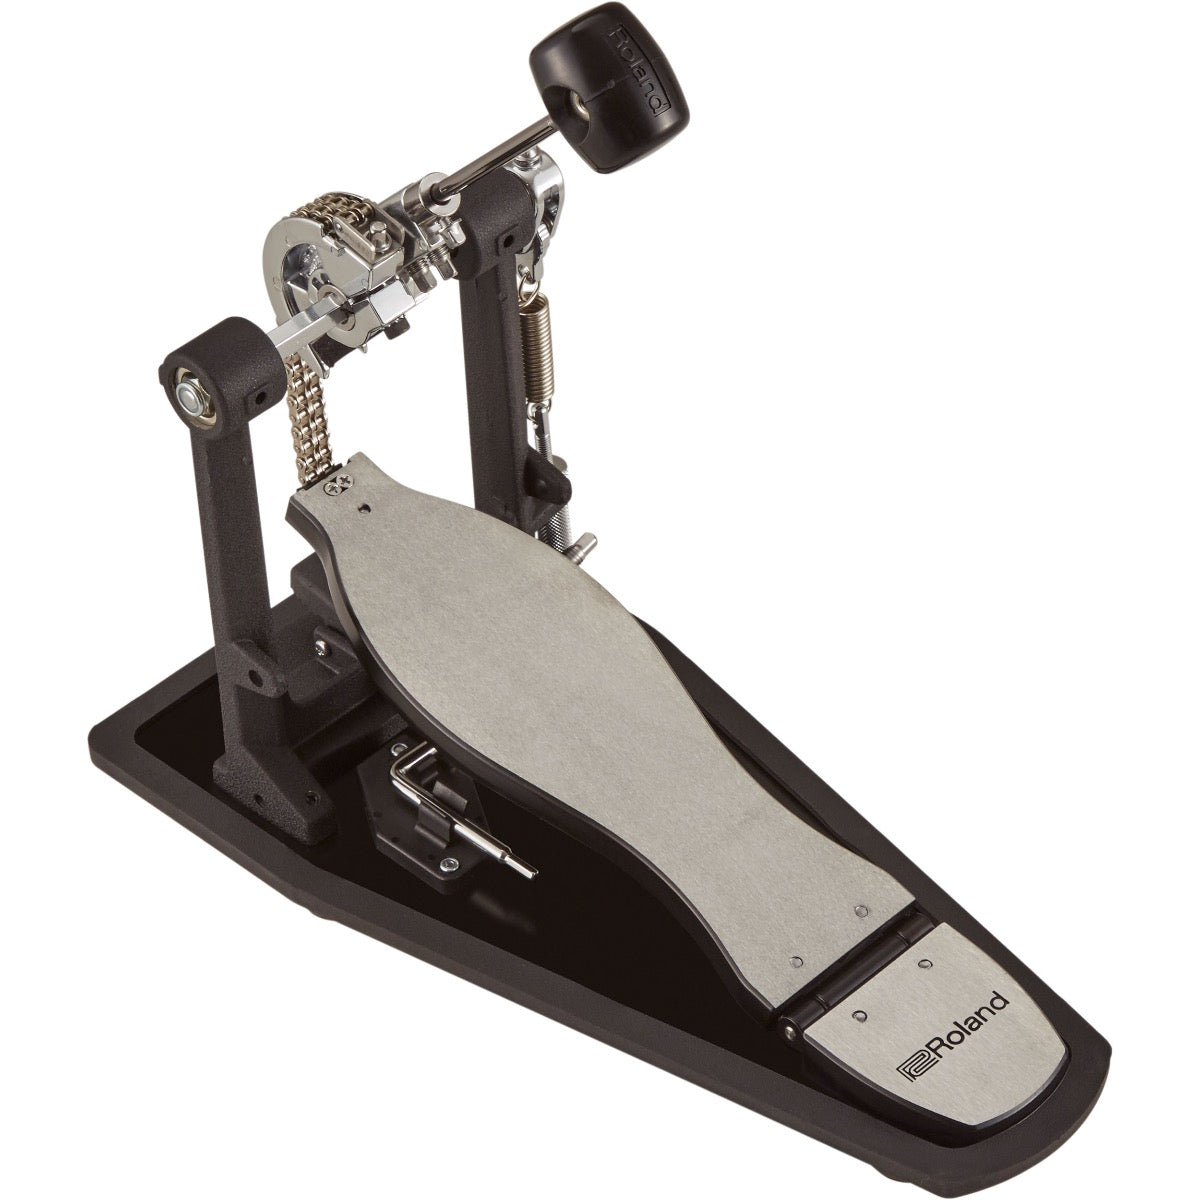 3/4 view of Roland RDH-100A V-Drums Kick Drum Pedal with Noise Eater Technology showing top, front and left side